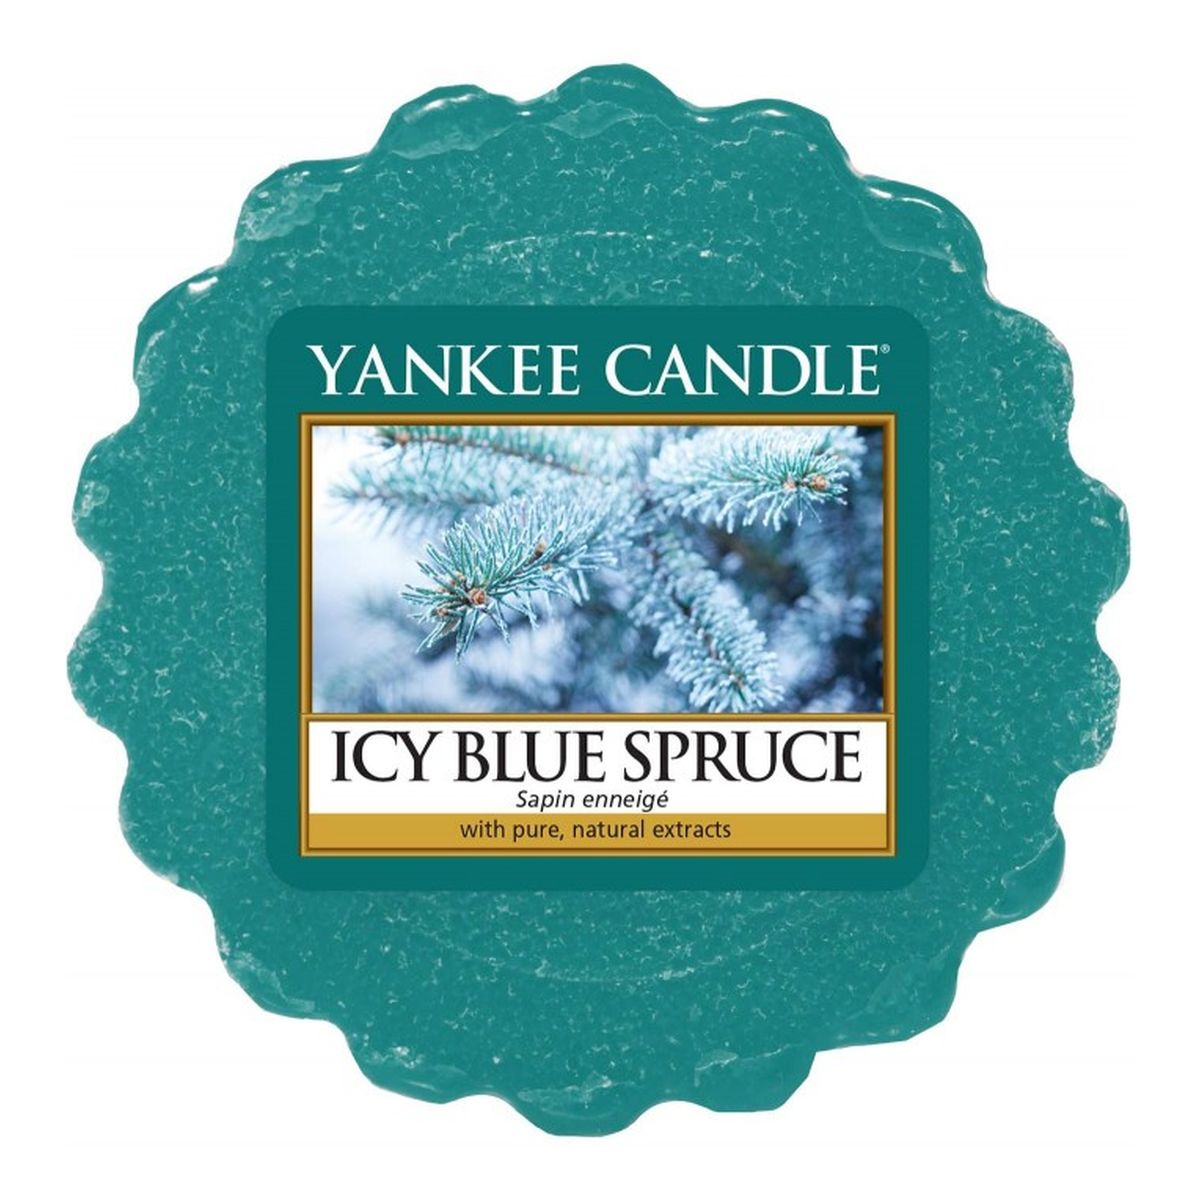 Yankee Candle Wax wosk zapachowy Icy Blue Spruce 22g